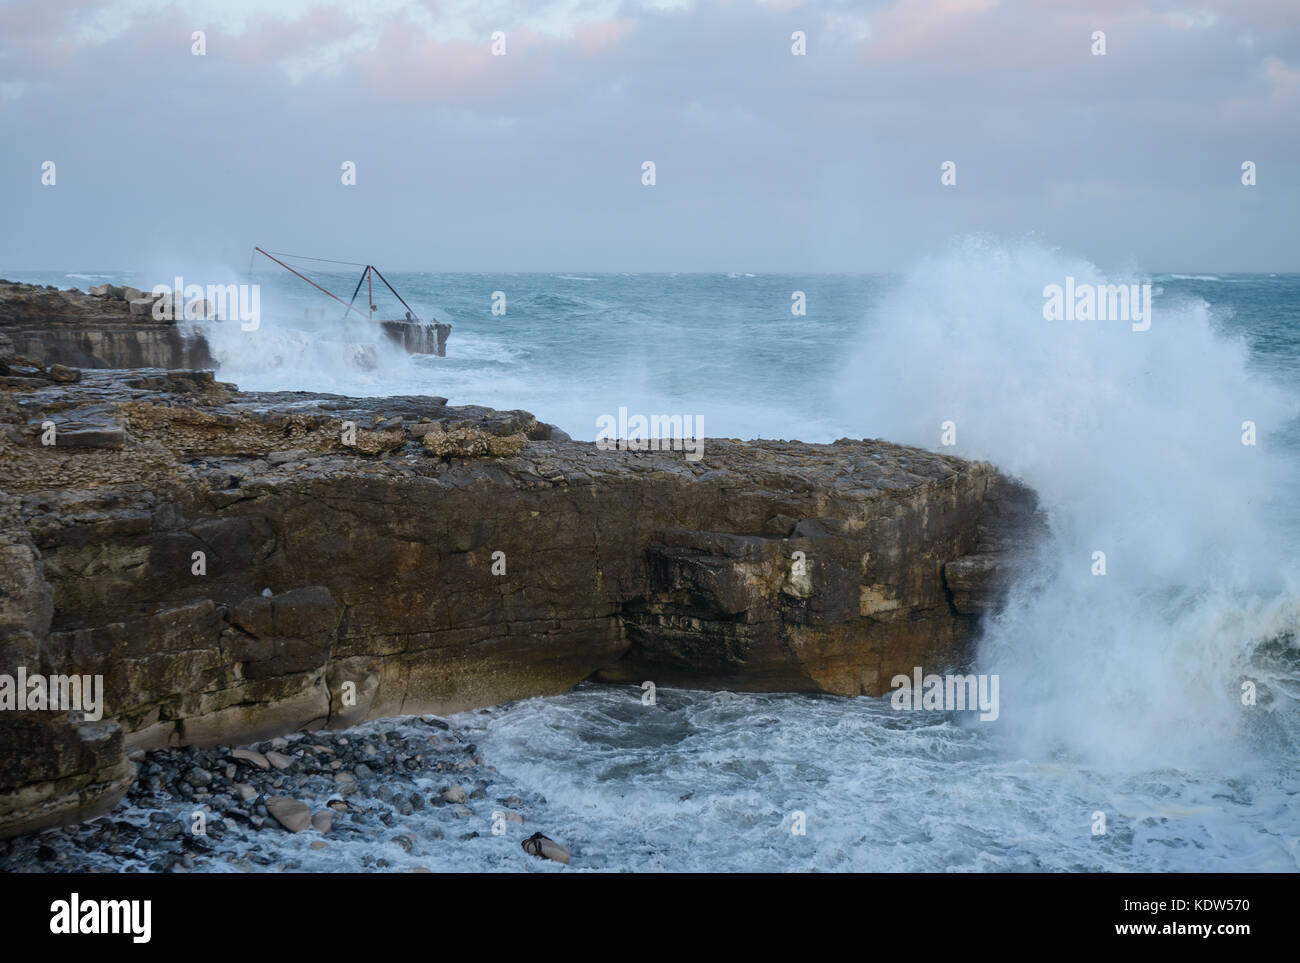 Portland Bill, Dorset. 16th Oct 2017. UK Weather. Storm Ophelia hits the south coast with huge waves and high winds. Portland Bill takes the rough conditions full on. Credit: DTNews/Live Alamy News Stock Photo